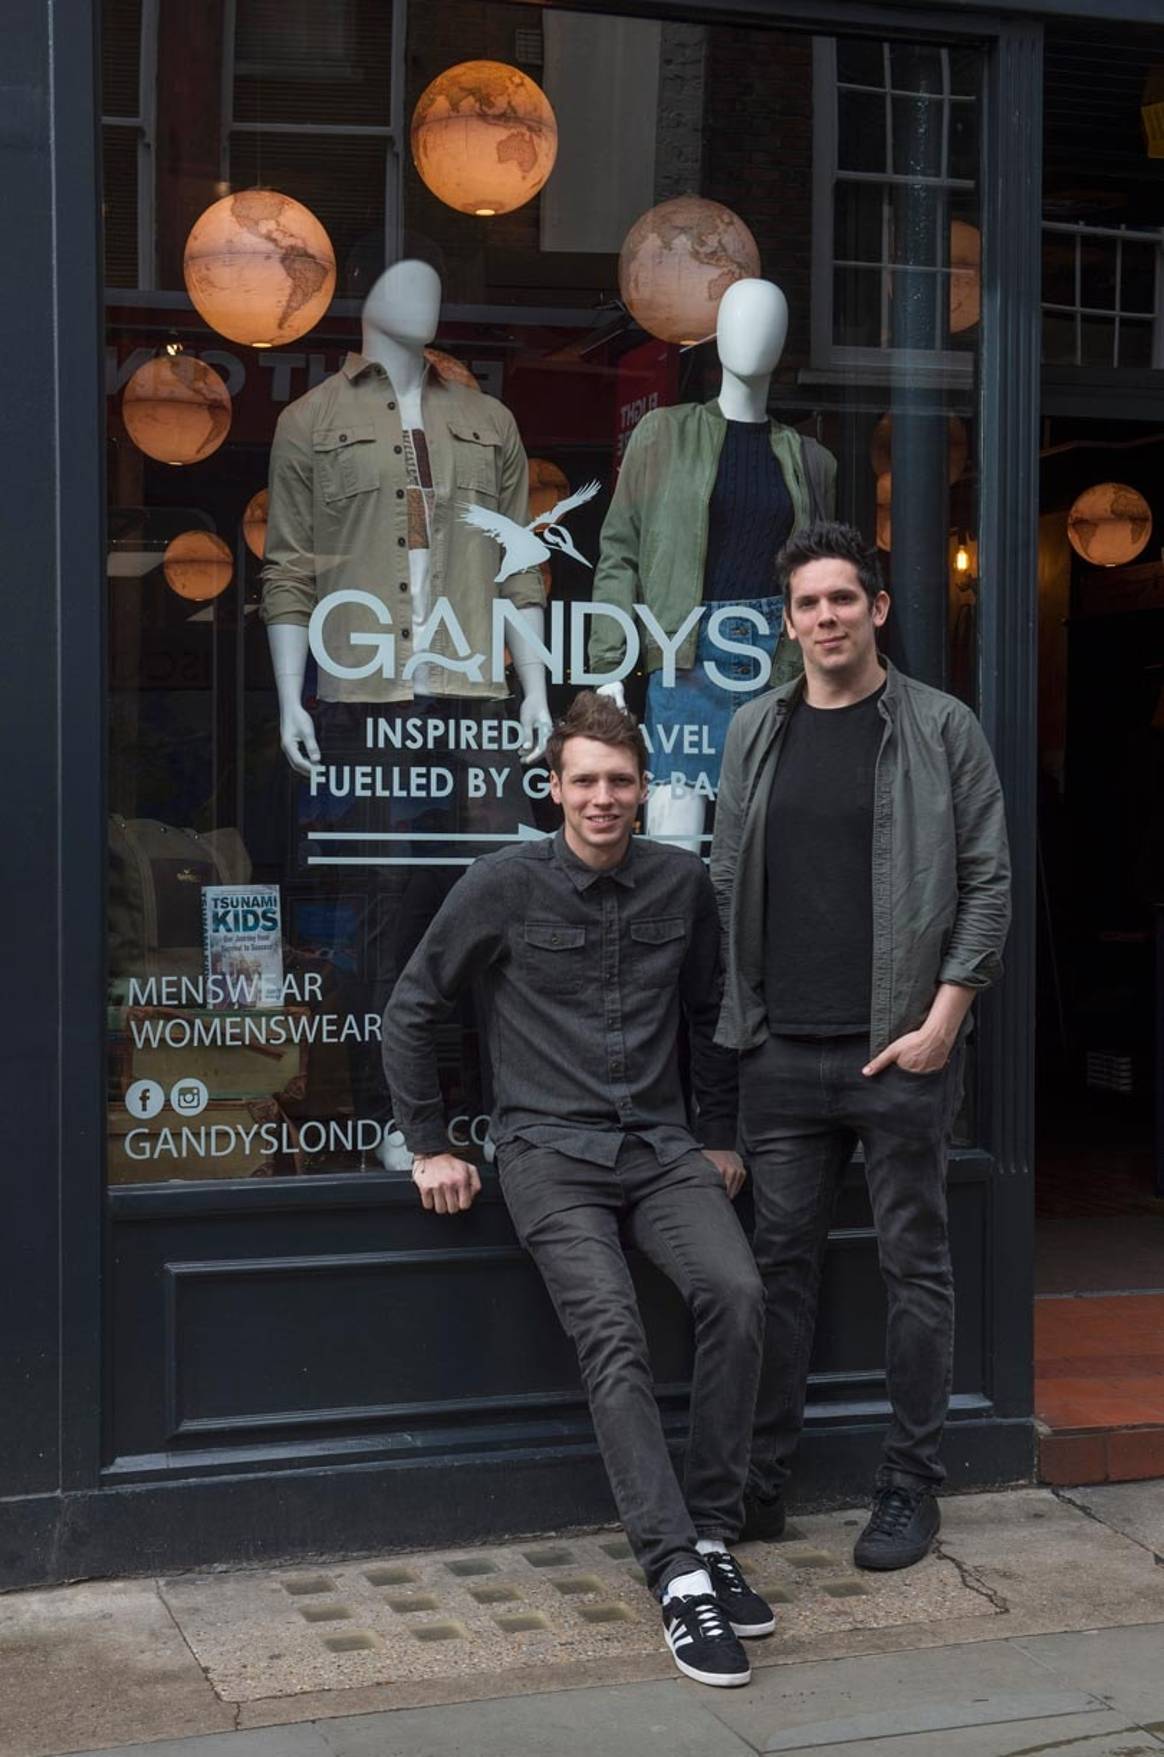 Lifestyle brand Gandys uses fashion as a force for good